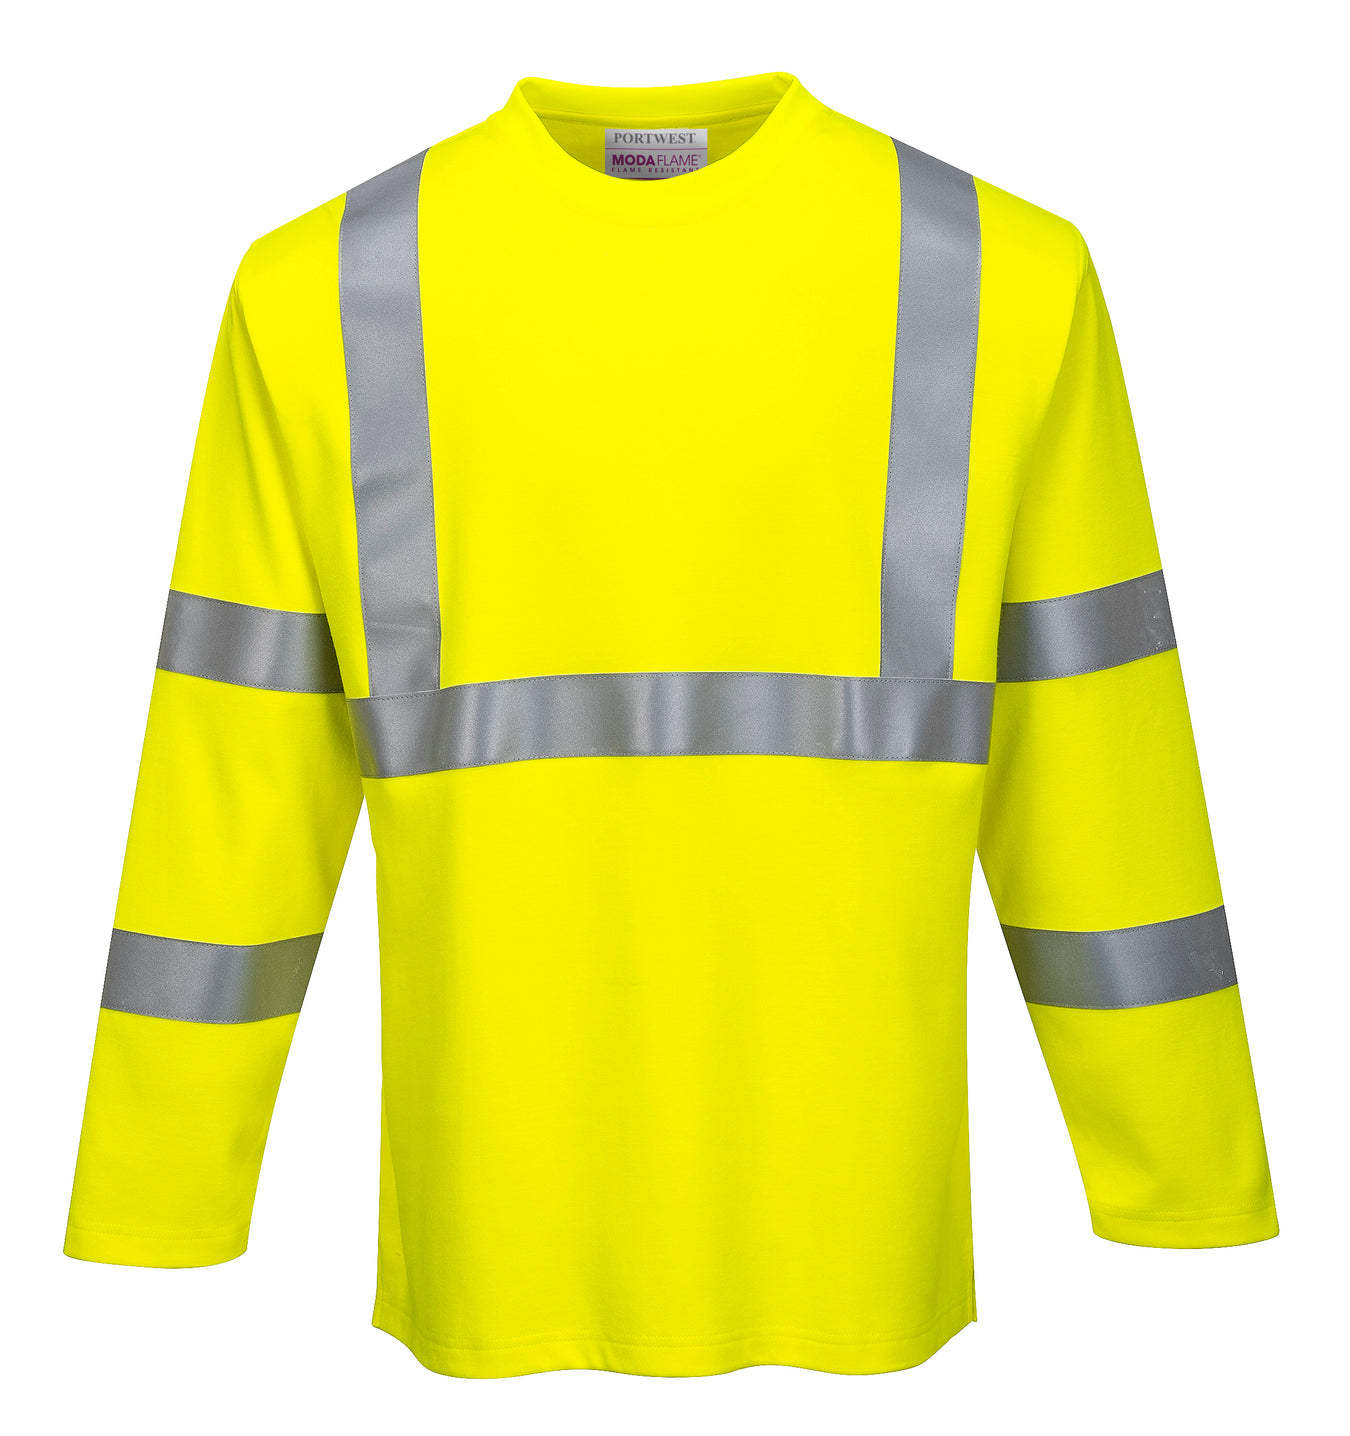 High Visibility Flame Resistant Gear